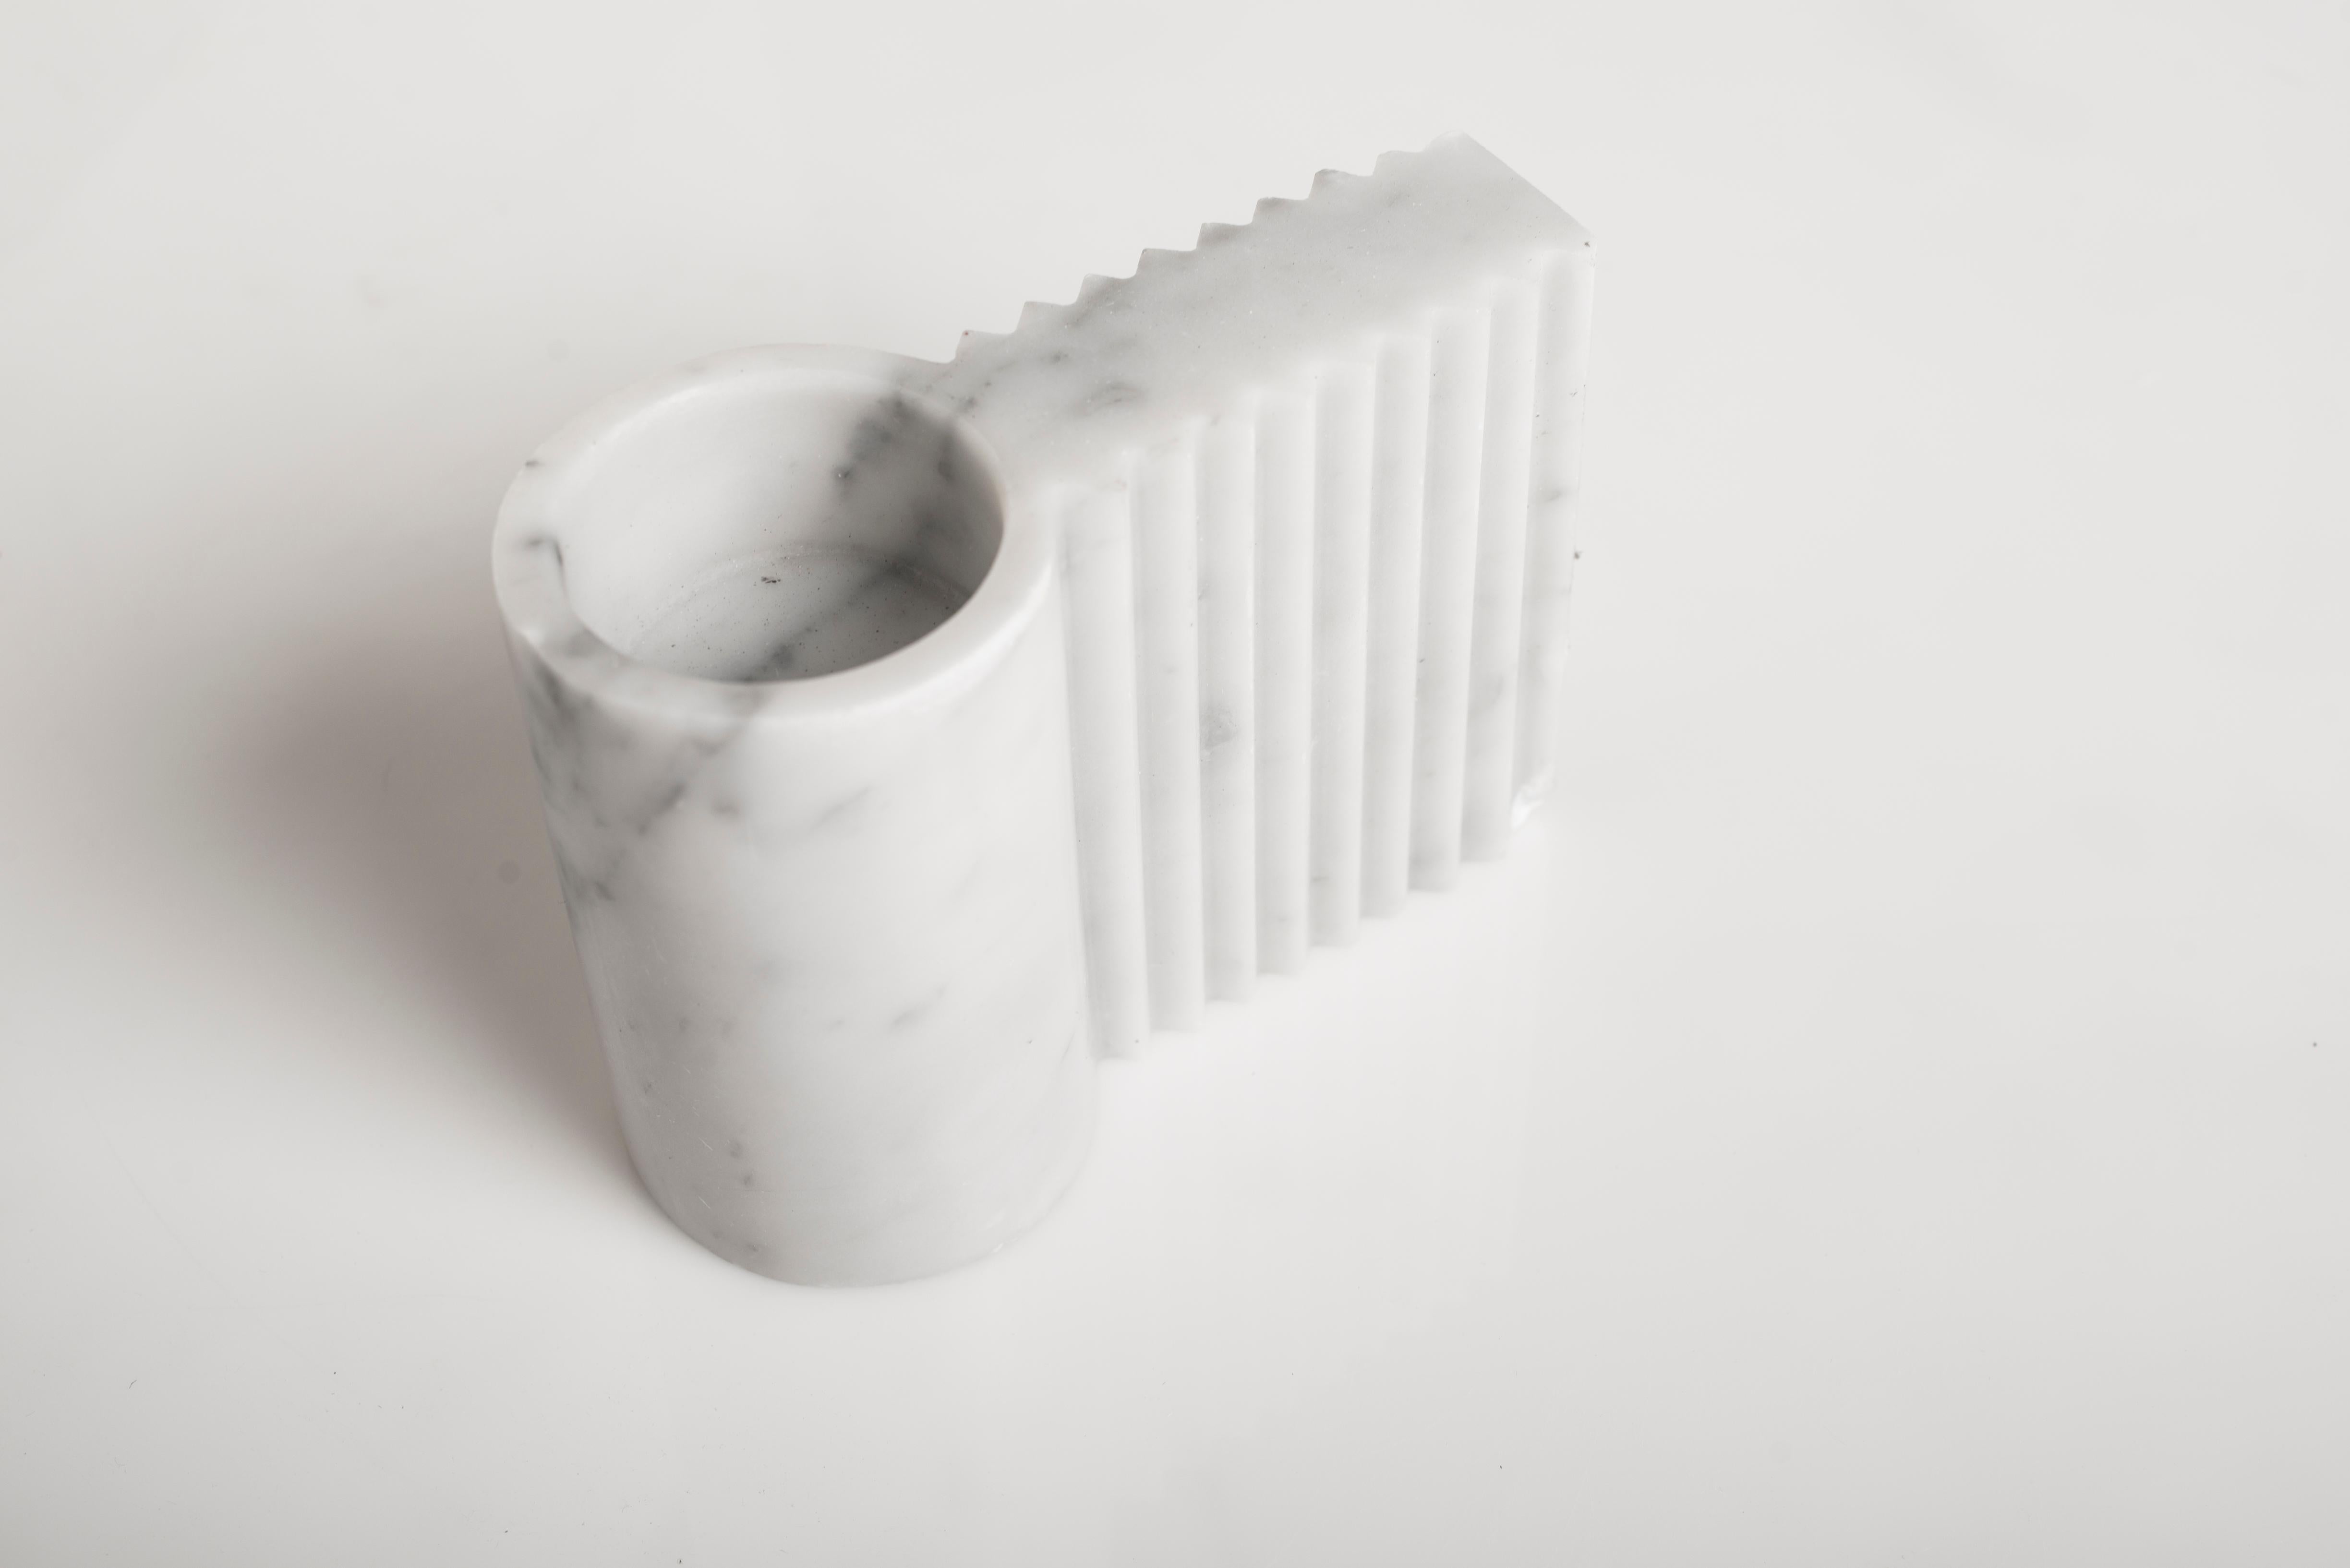 Kabul sculpture by Carlo Massoud
Handmade 
Dimensions: D 7 x W 15.6 x H 12 cm 
Materials: Carrara Marble

Carlo Massoud’s work stems from his relentless questioning of social, political, cultural, and environmental norms. He often pushes his